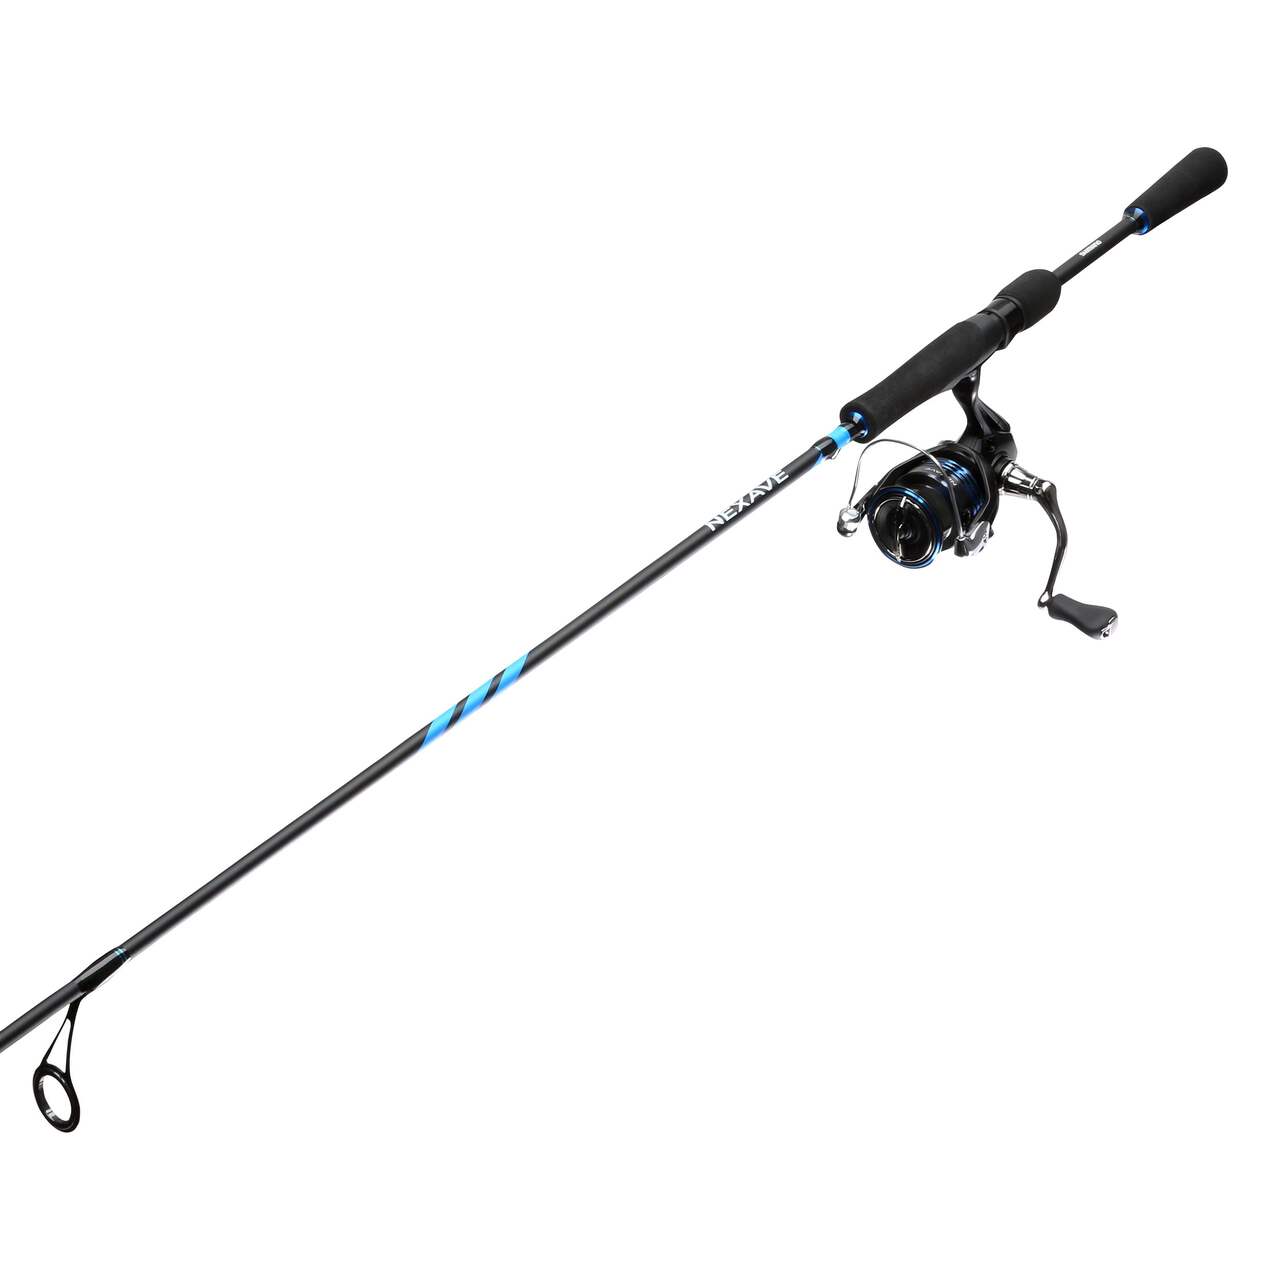 https://media-www.canadiantire.ca/product/playing/fishing/fishing-equipment/0775450/shimano-nexave-spinning-combo-6-6-medium-119f1191-bc25-4879-bcbf-fe8e9a0520a6-jpgrendition.jpg?imdensity=1&imwidth=1244&impolicy=mZoom